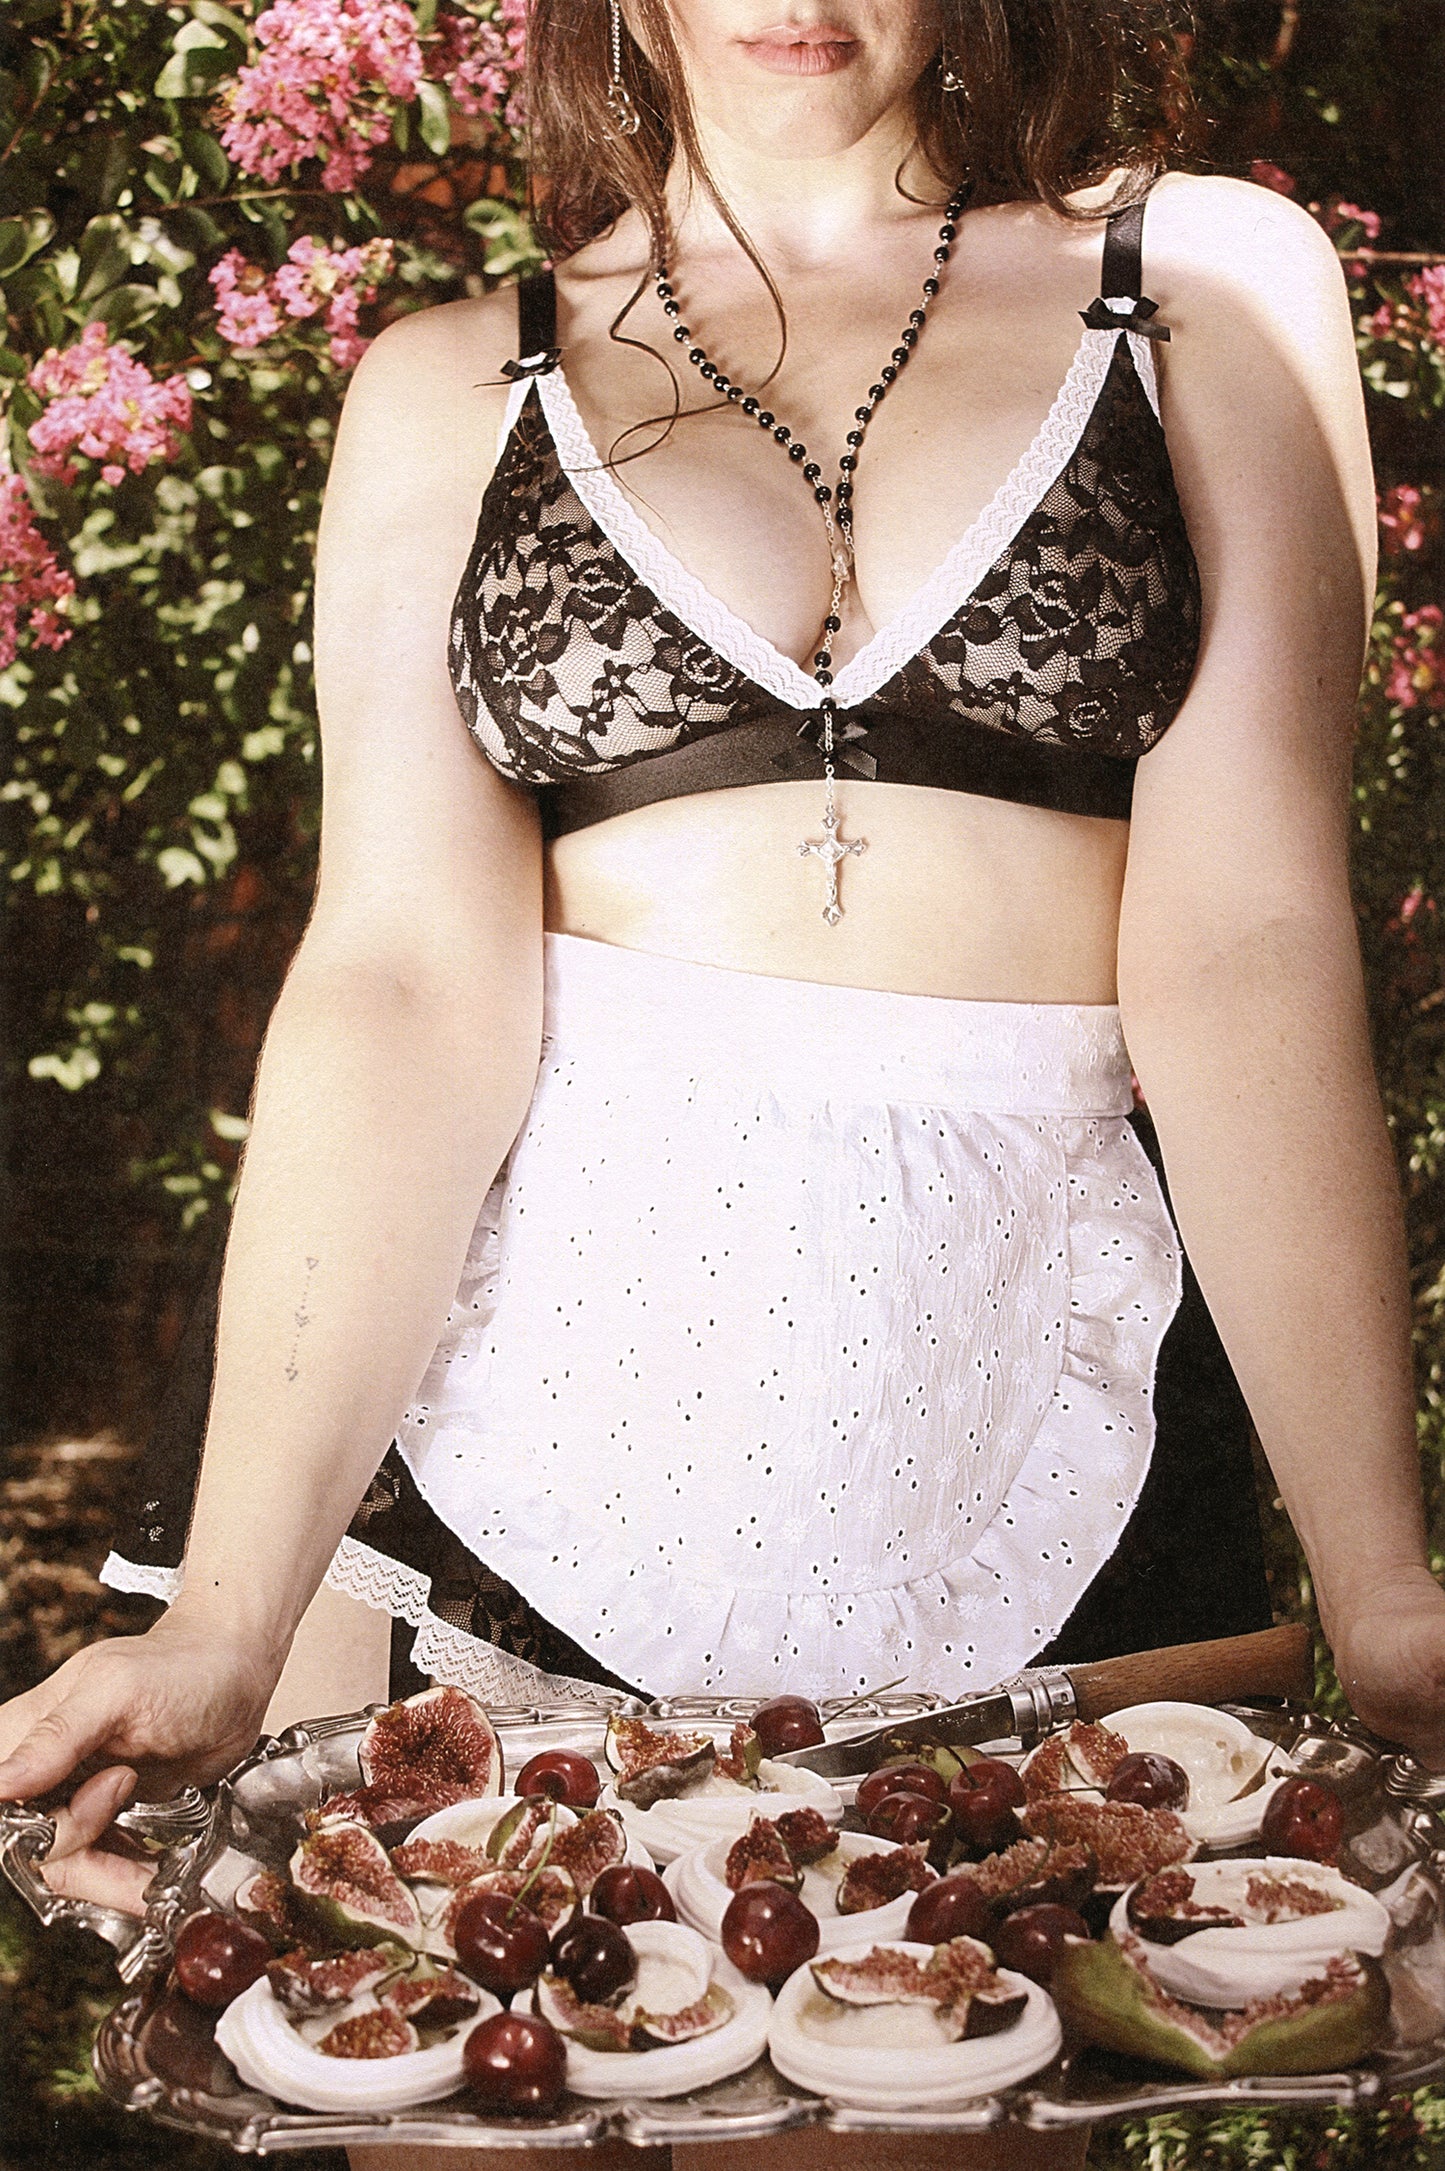 Sally Bralette Resurrection Lace with White Trim